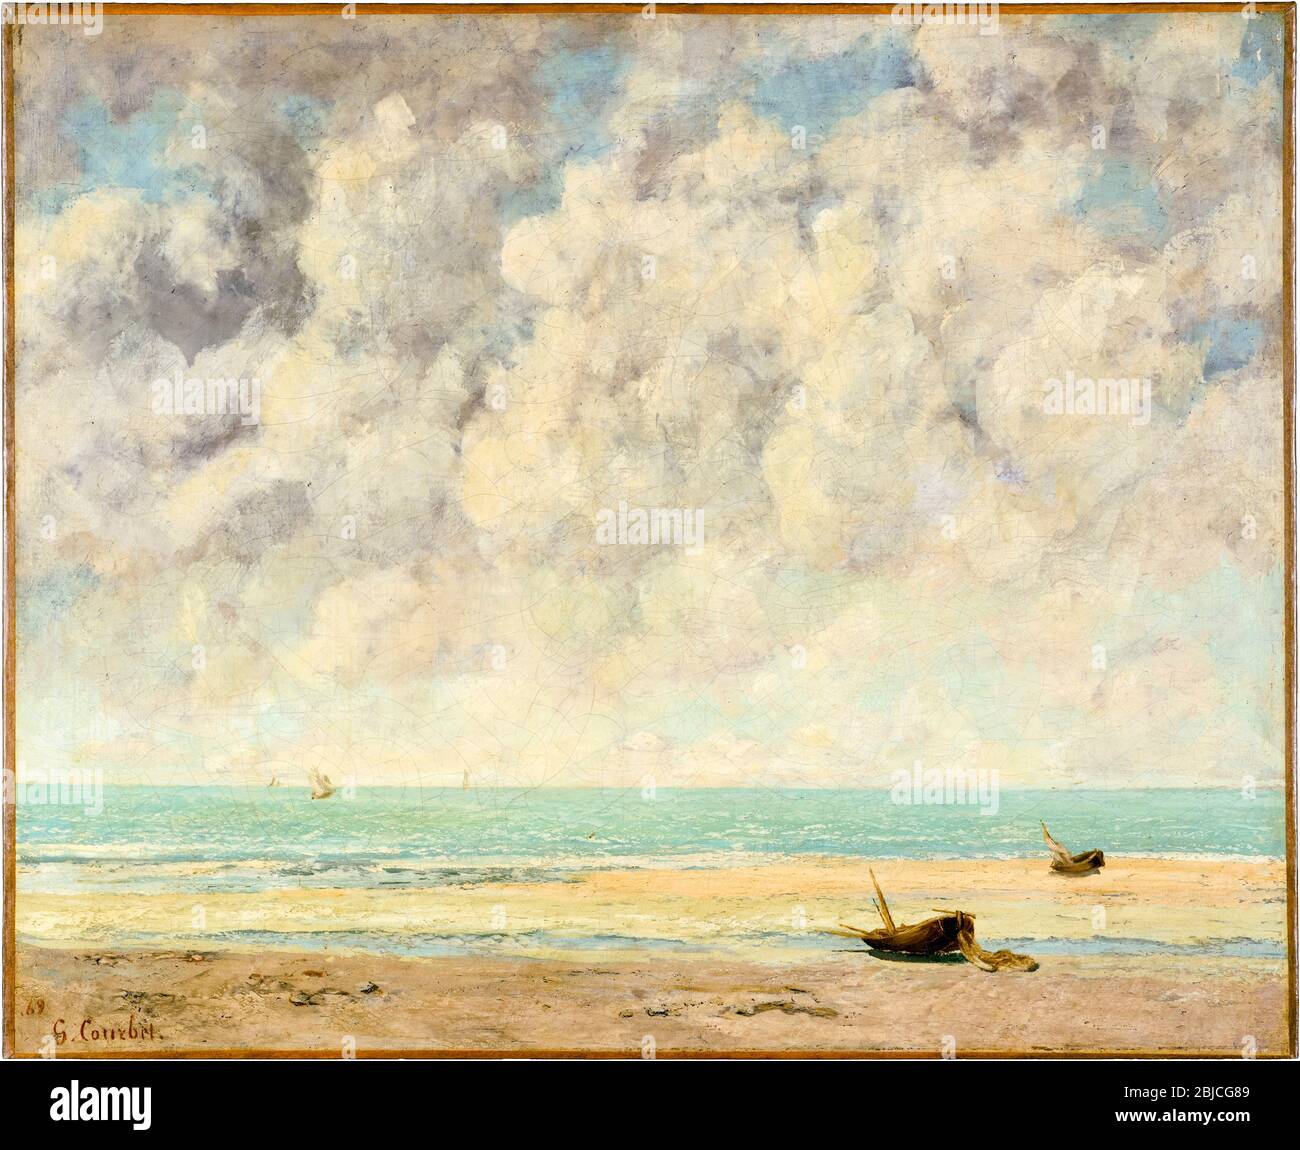 The Calm Sea, landscape painting by Gustave Courbet, 1869 Stock Photo